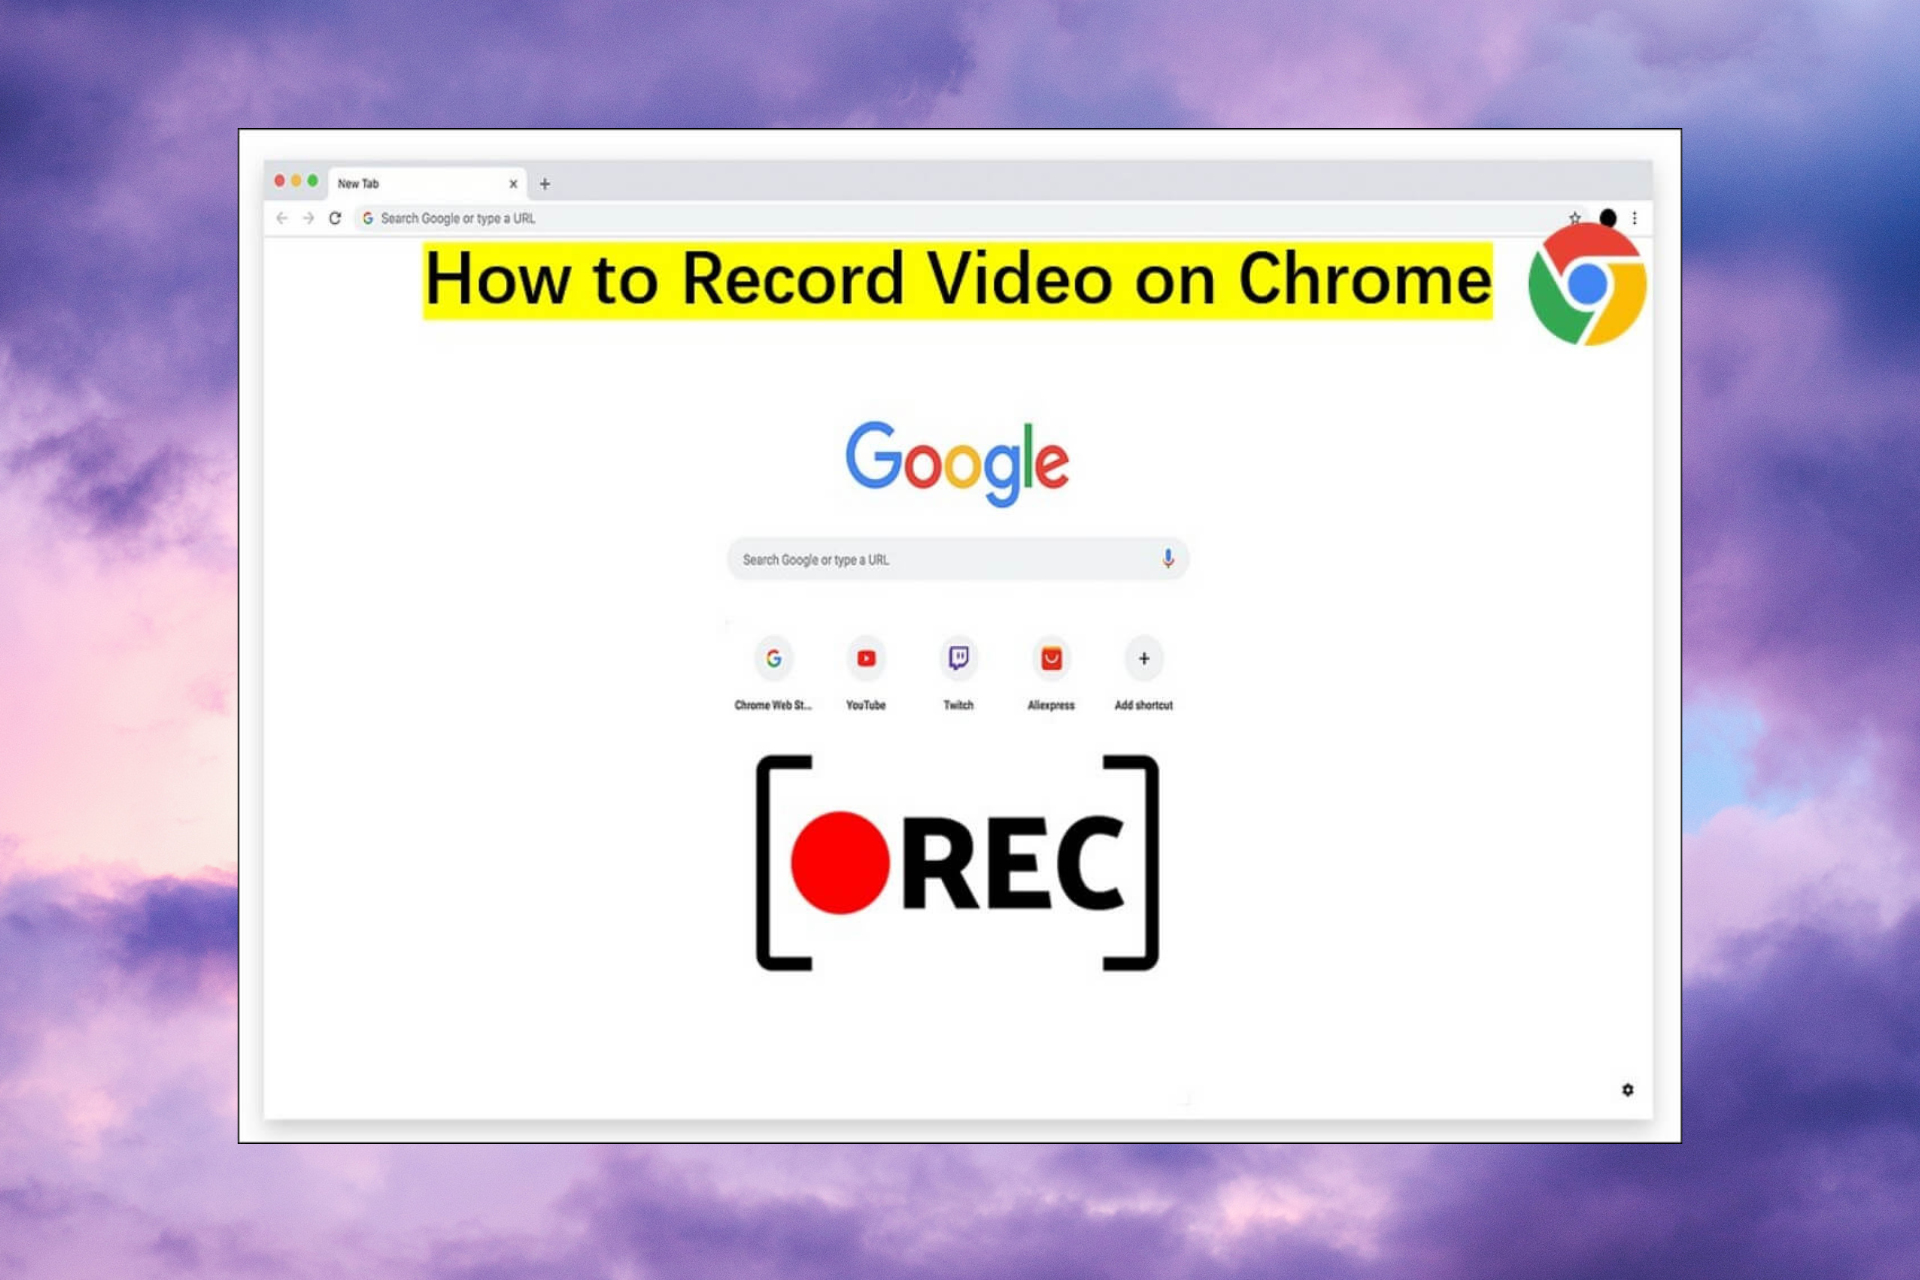 Several methods to record video on Chrome